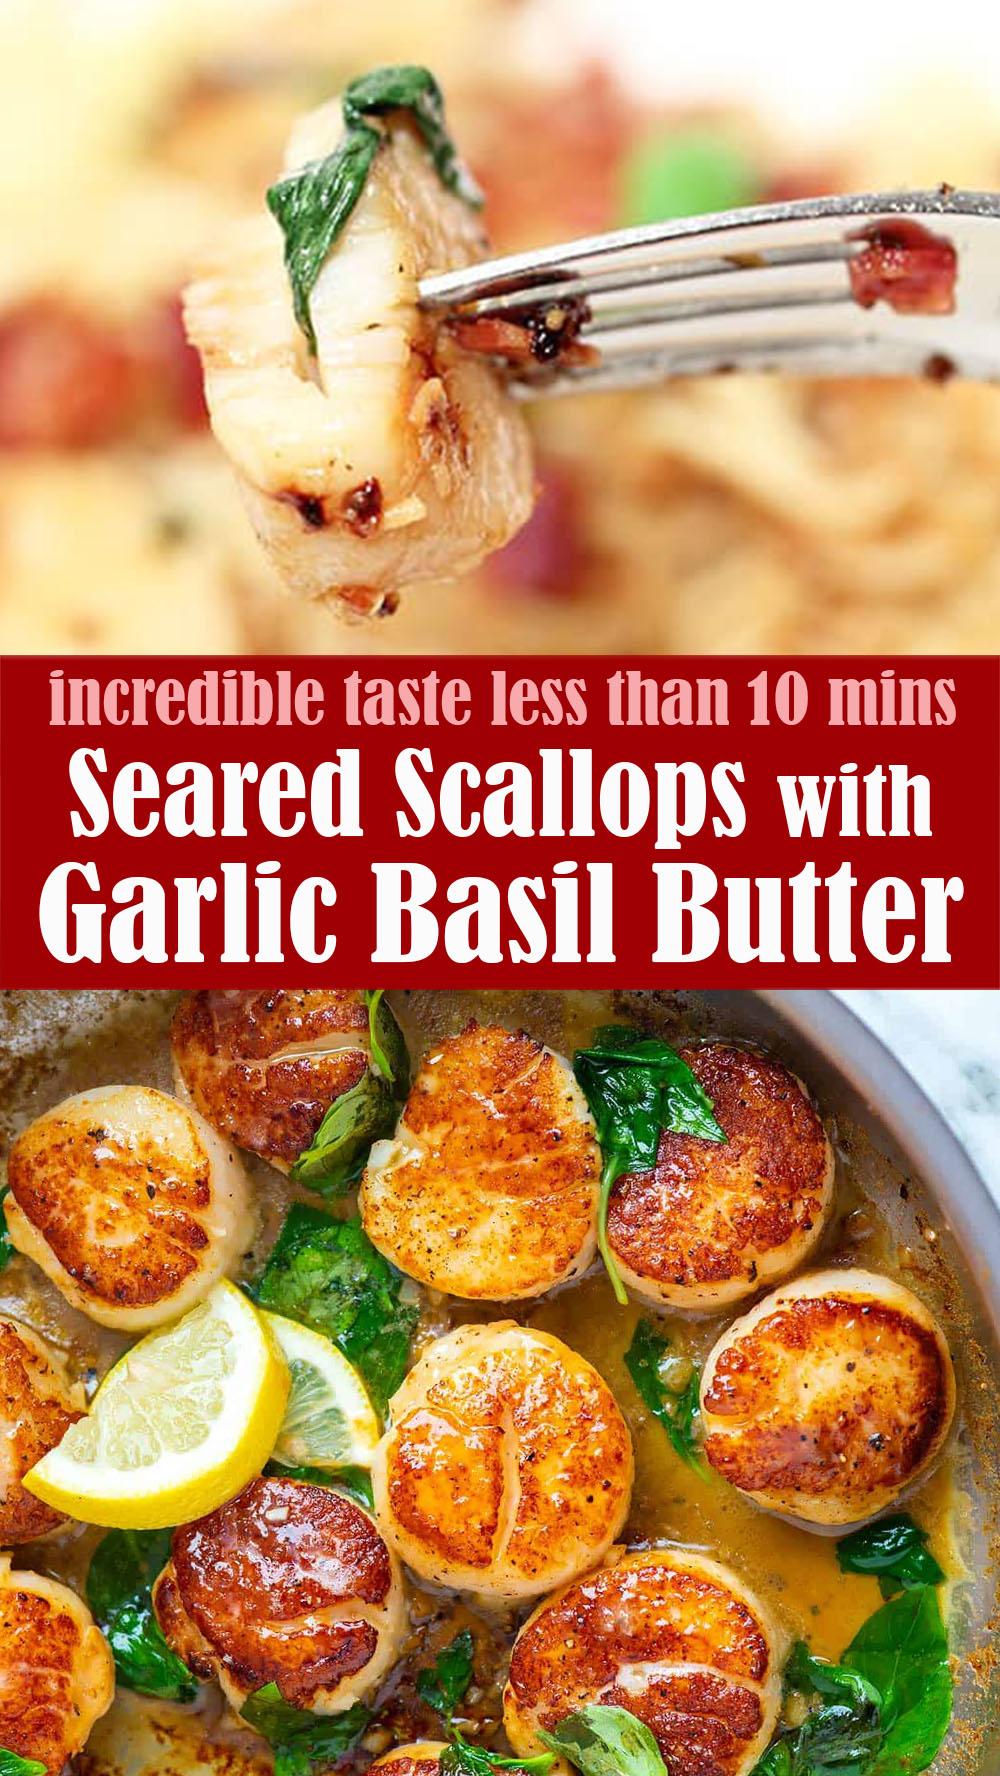 10 Minute Seared Scallops with Garlic Basil Butter